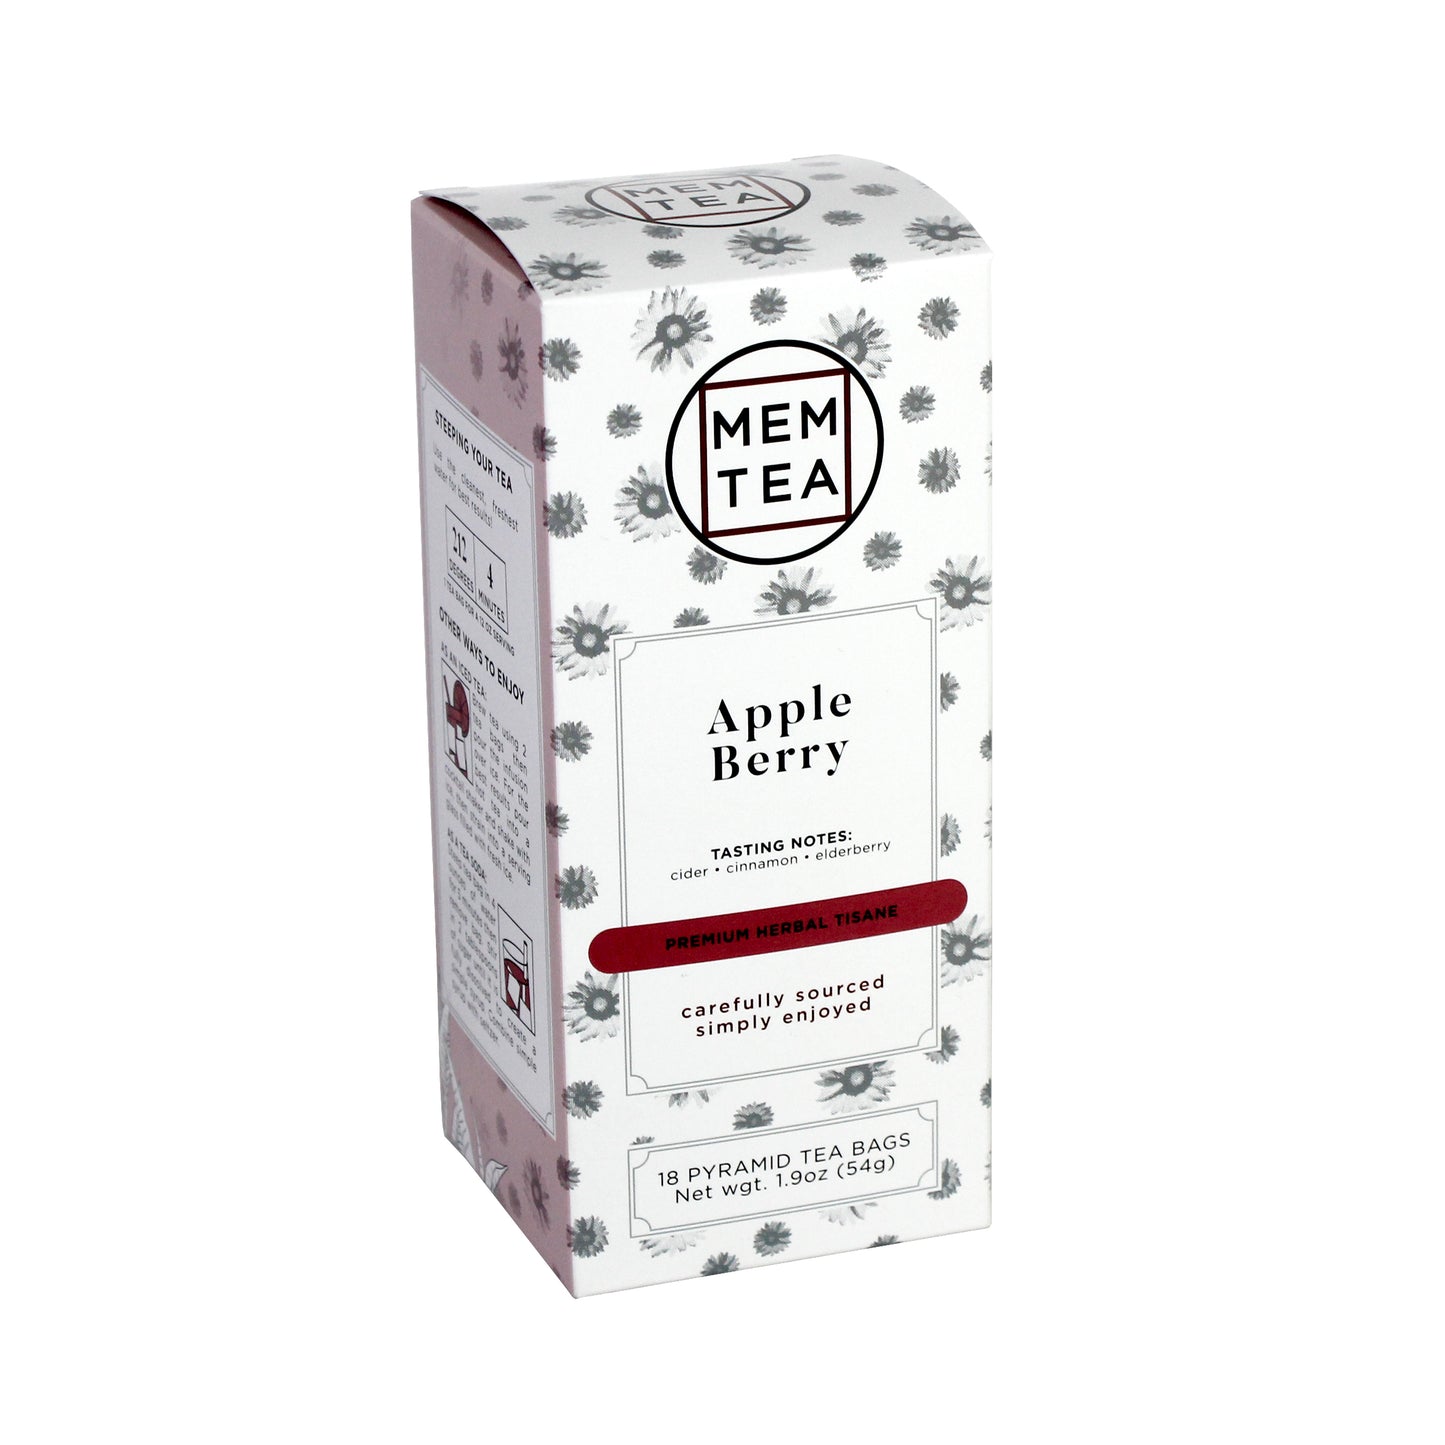 Apple Berry - Pyramid Teabags